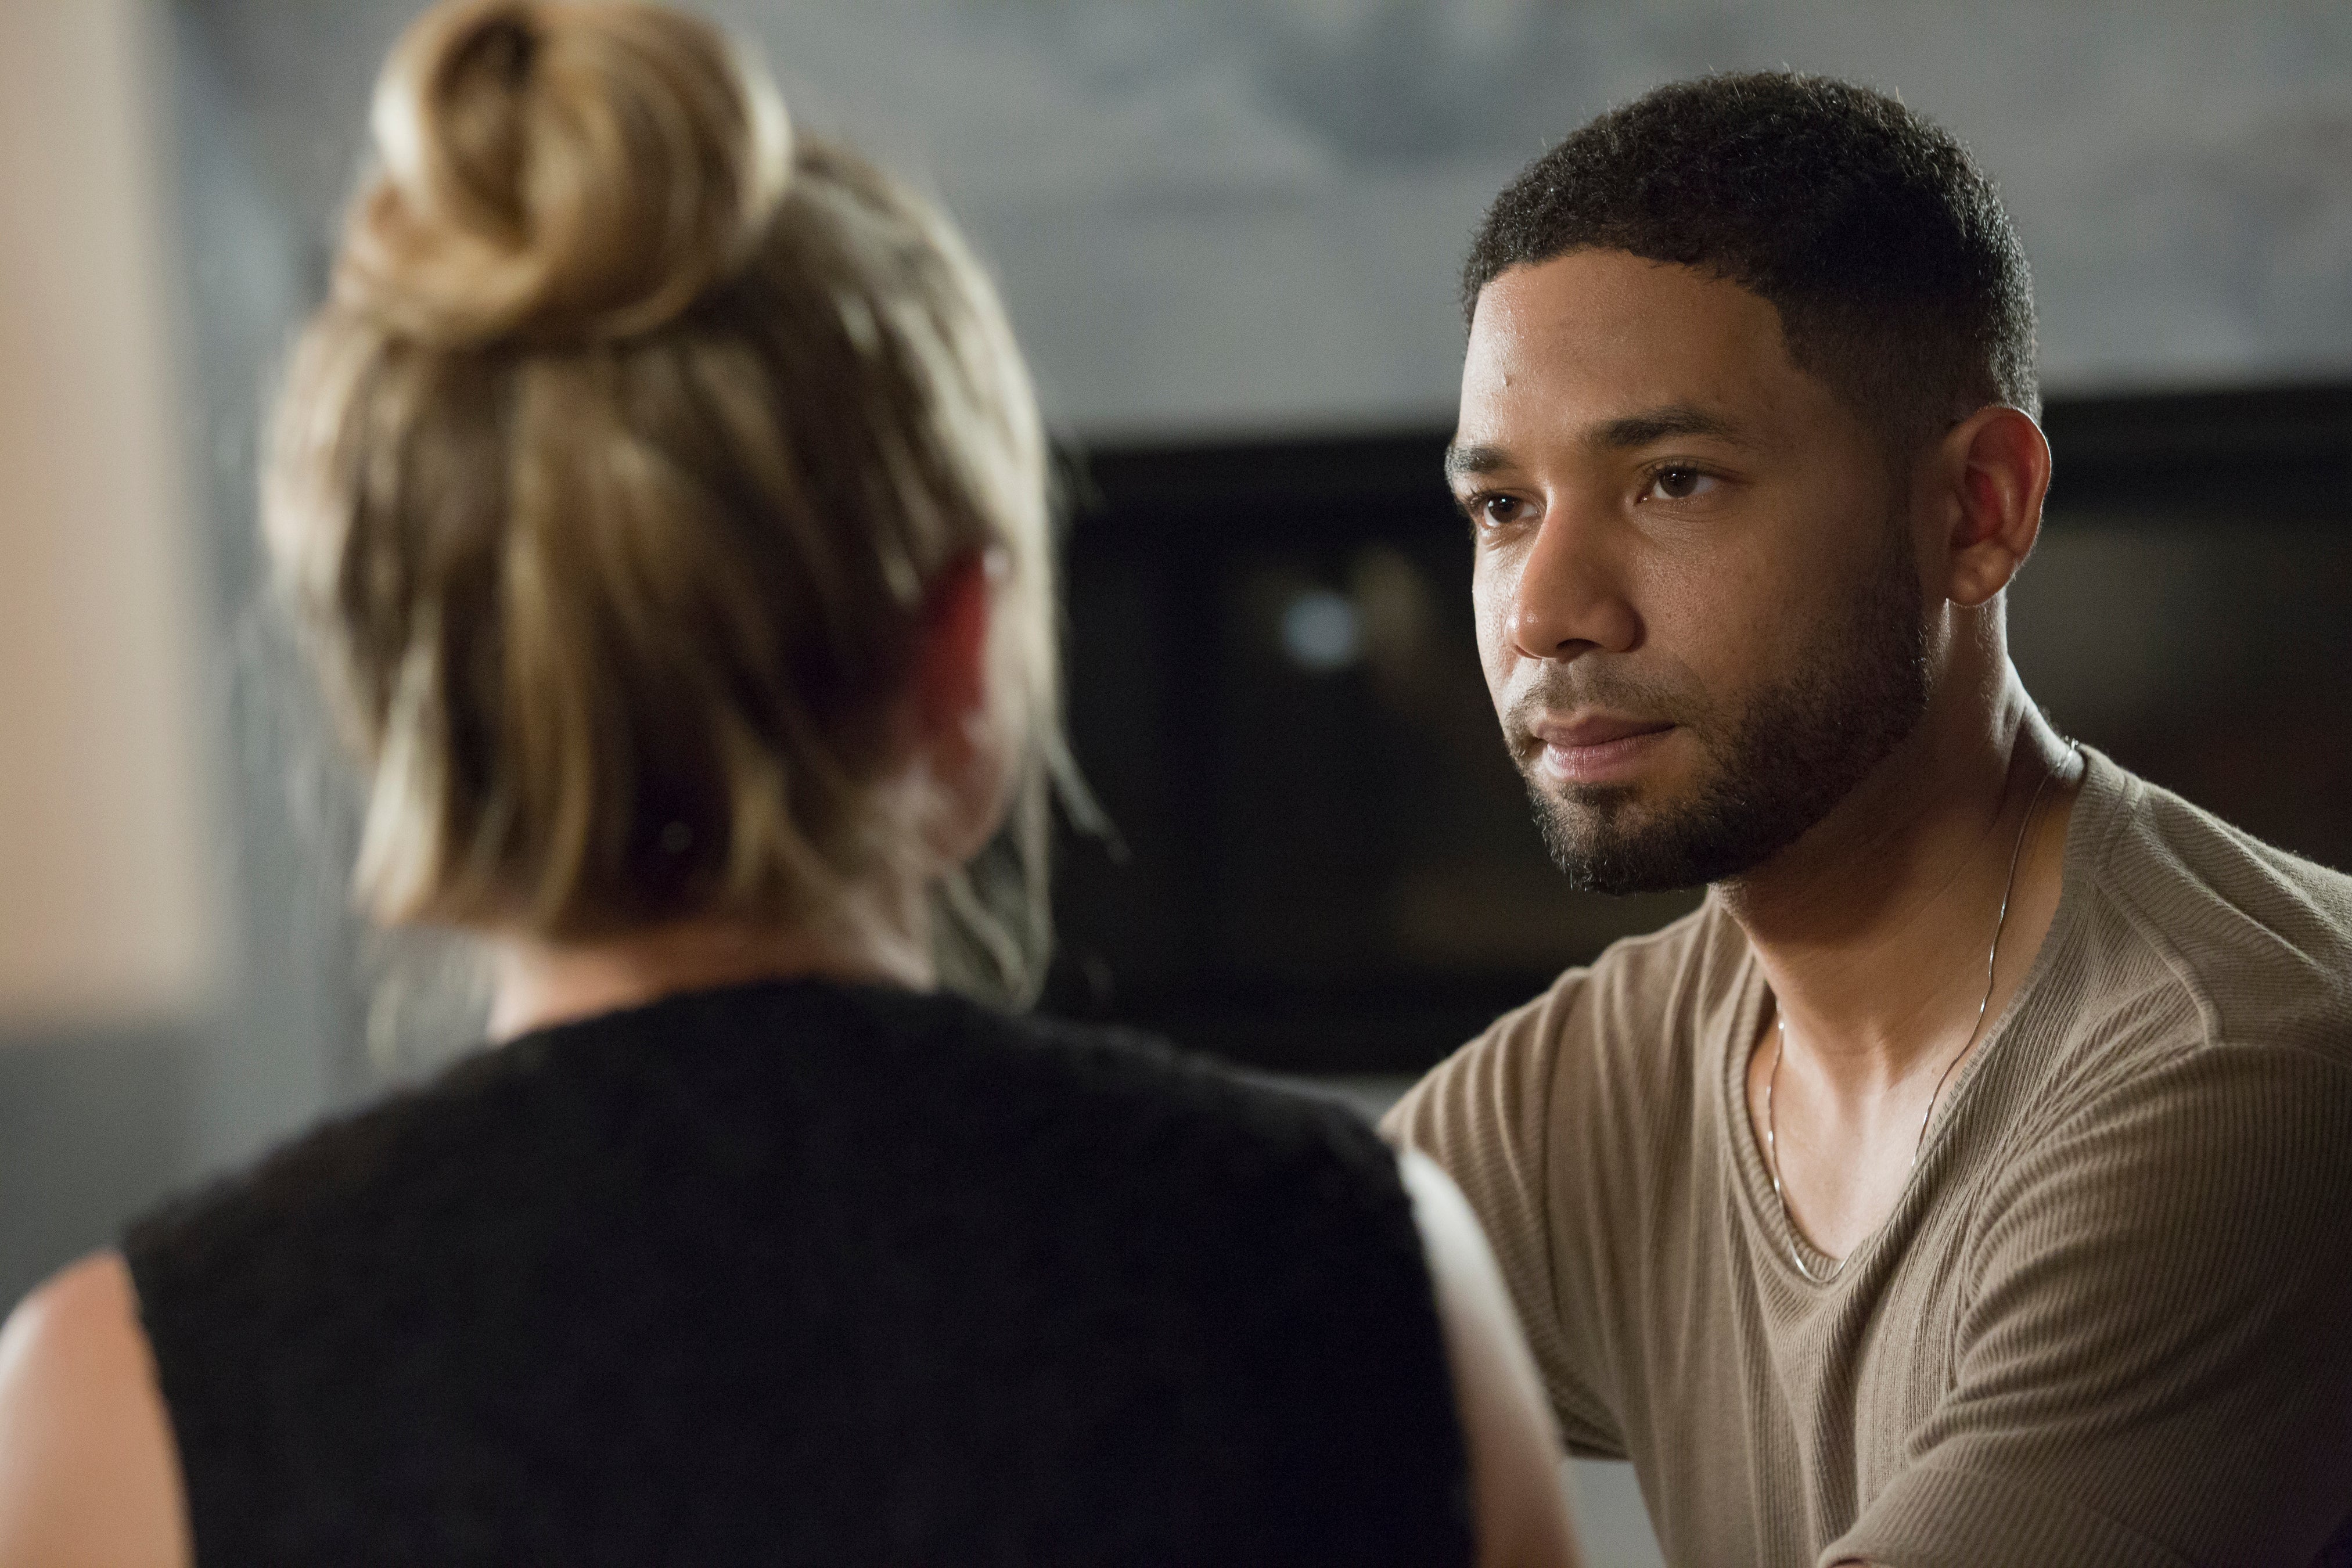 Get Your "Empire" Fix with a Sneak Peek of Episode 2
